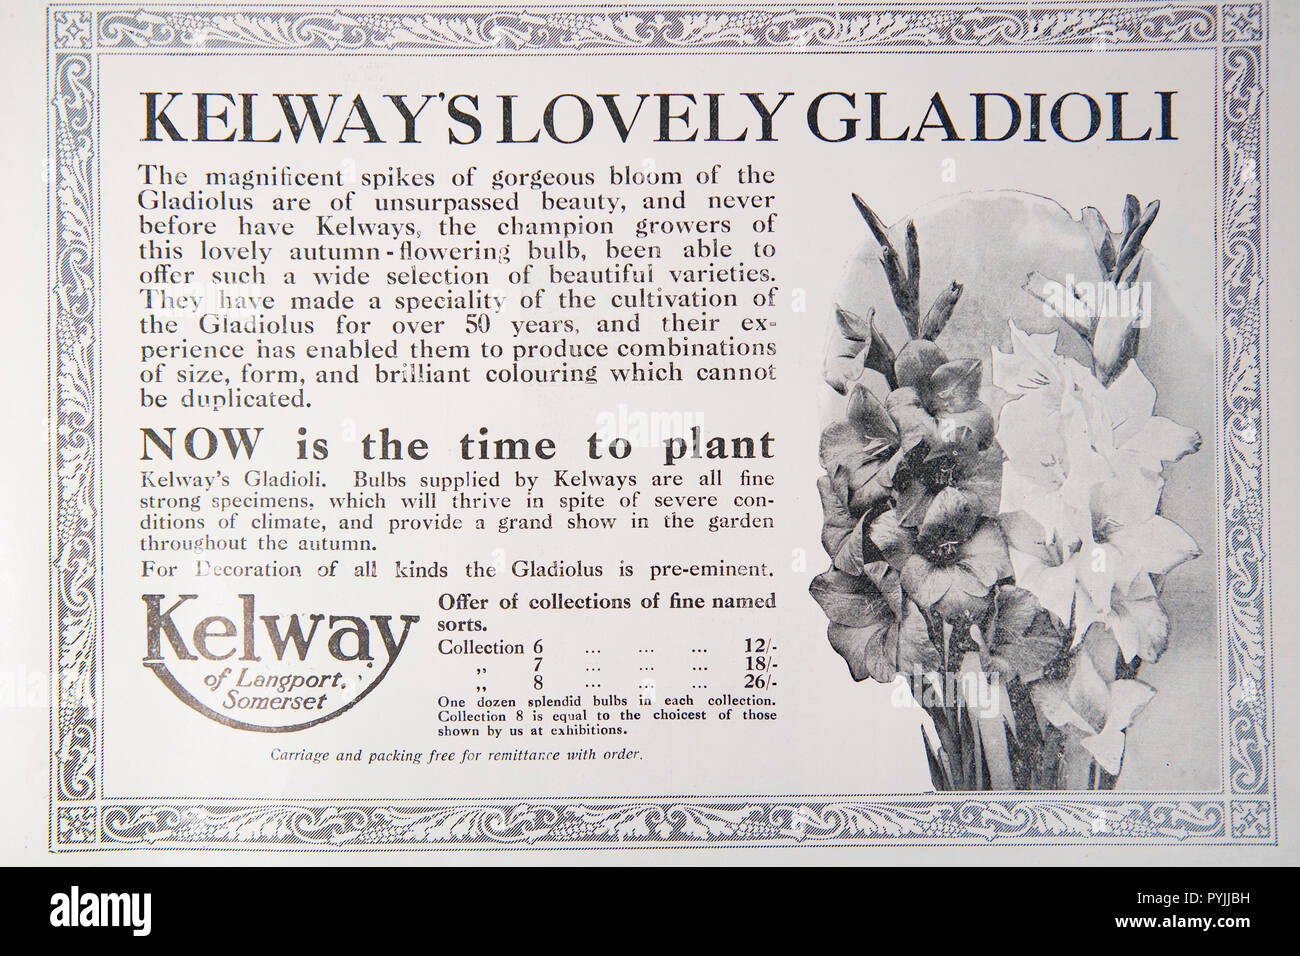 Old advert for Kelway’s Lovely Gladiloli. From a British magazine from the 1914-1918 period. England UK GB Stock Photo